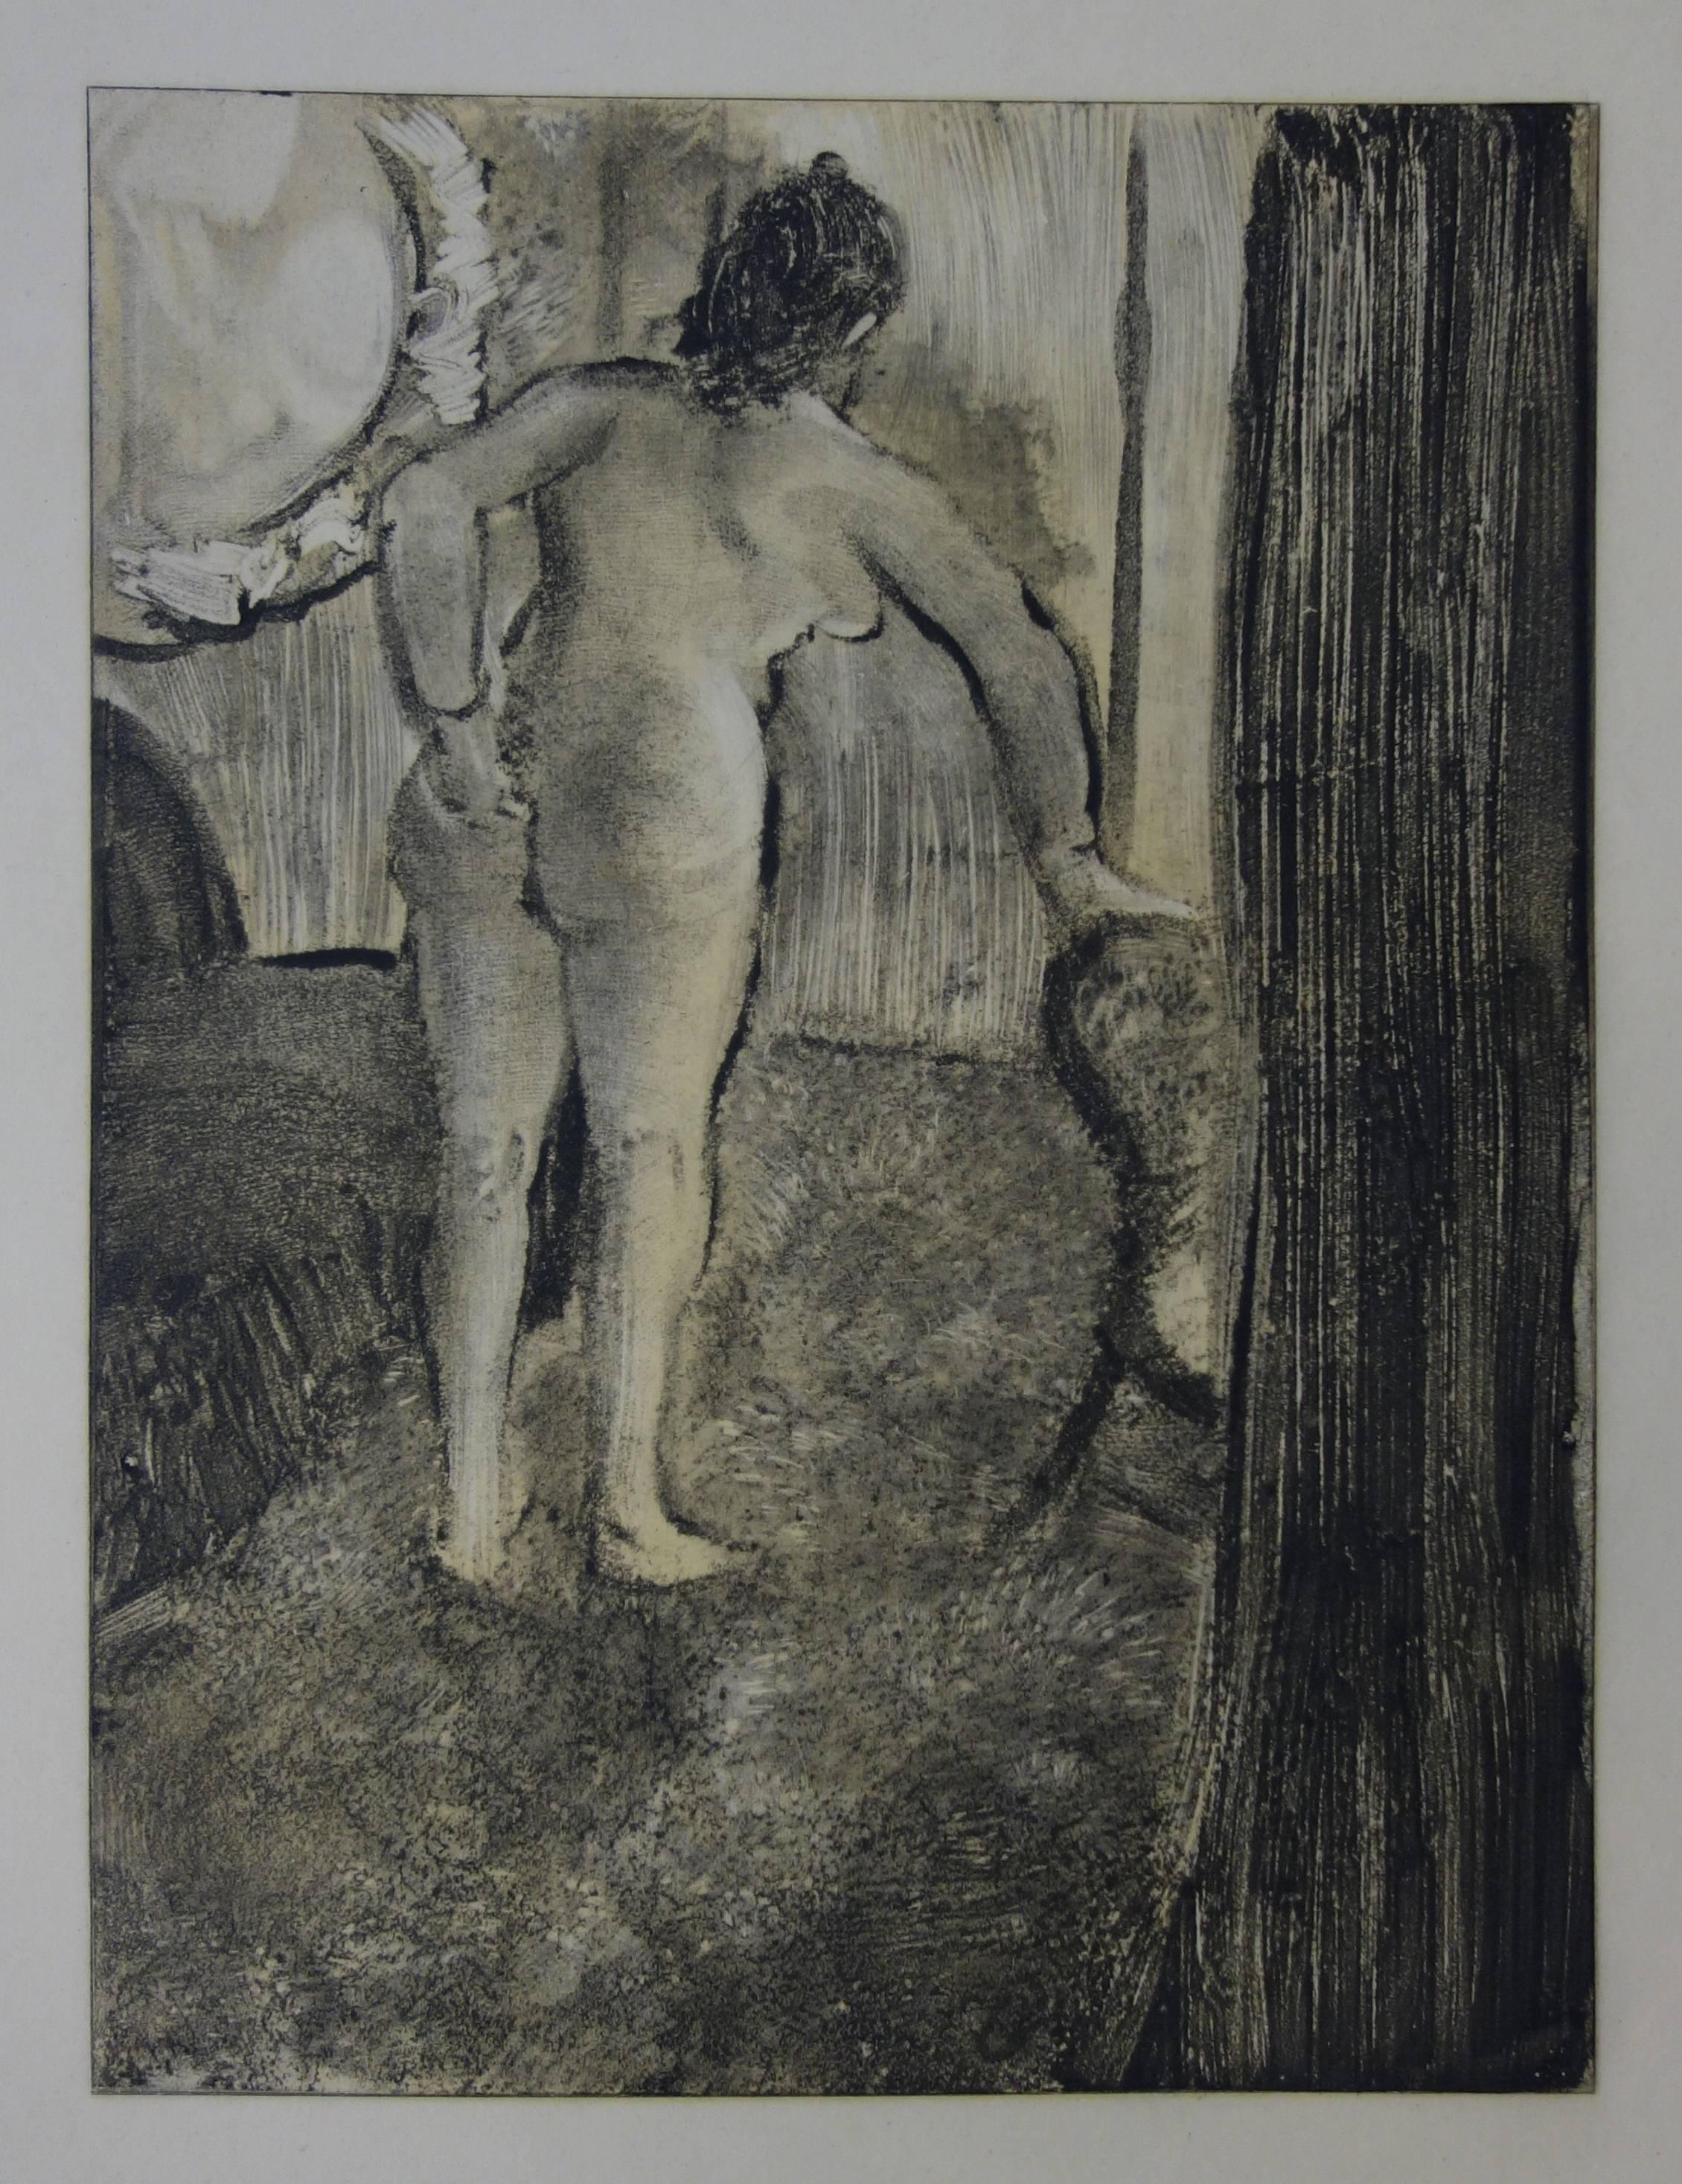 Whorehouse Scene : Waking Up After a Long Love Night - Etching